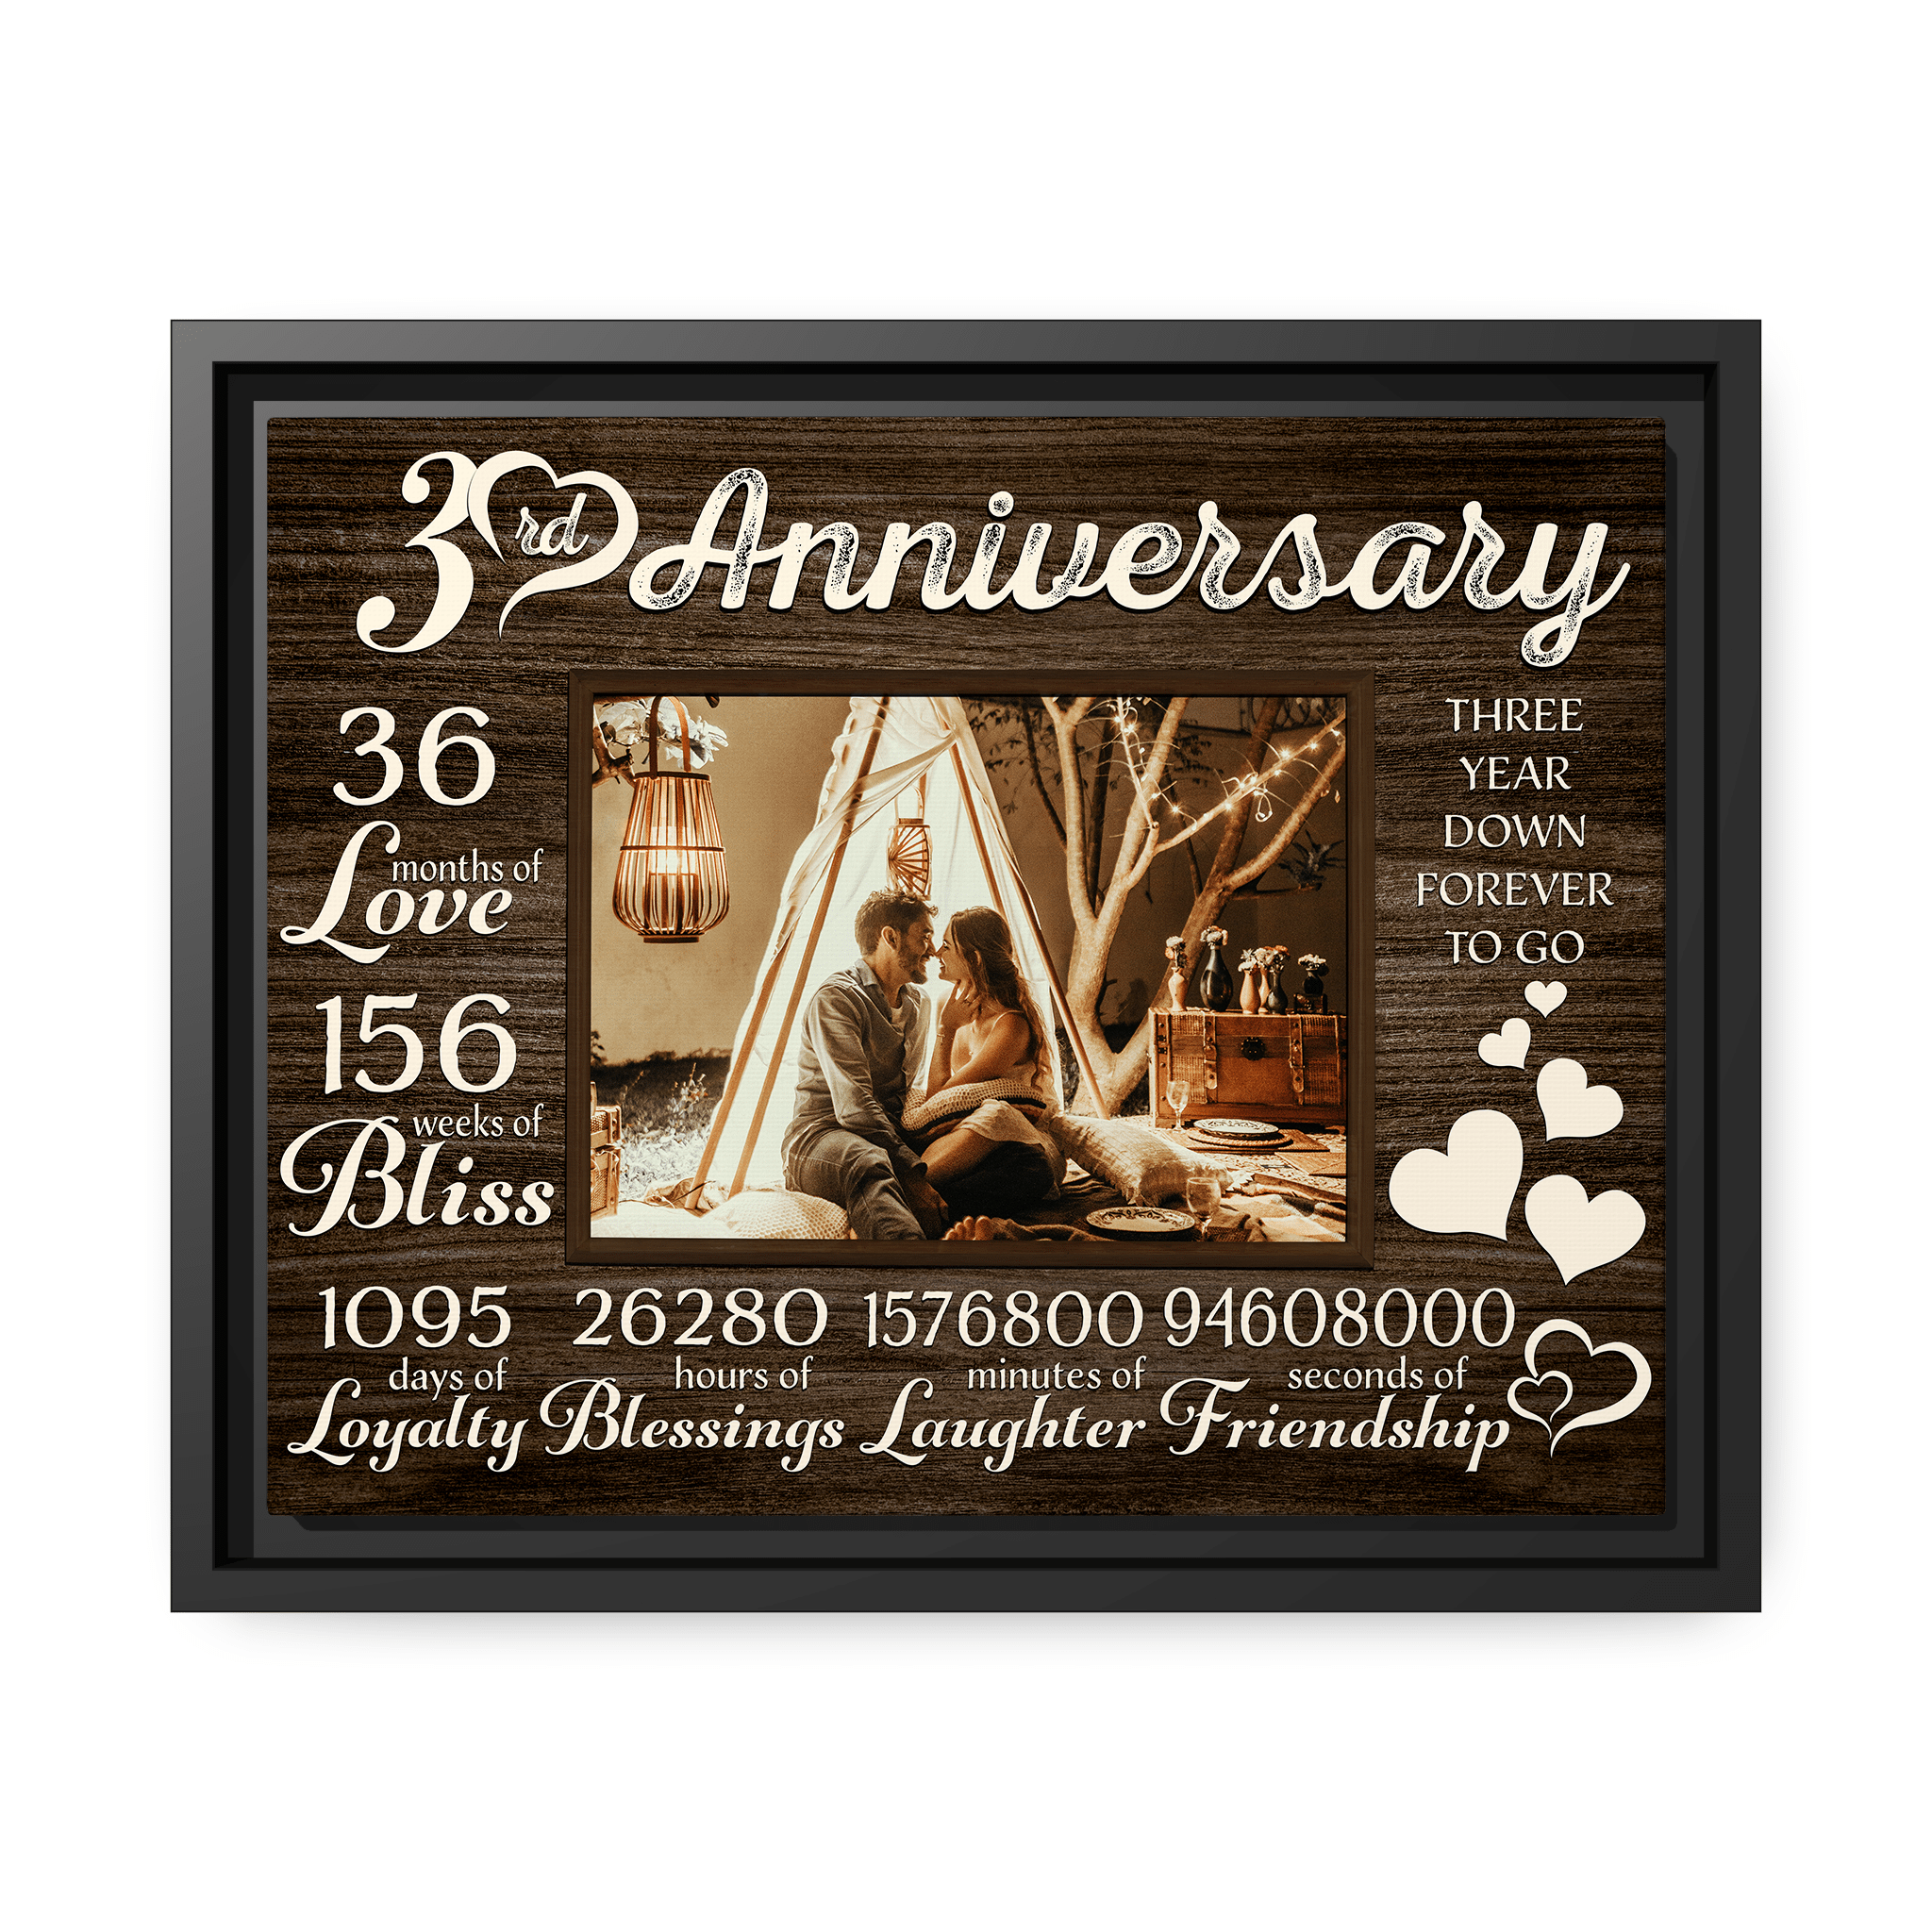 I Love You Couple Wedding Anniversary Wife Husband Personalized Canvas -  Vista Stars - Personalized gifts for the loved ones